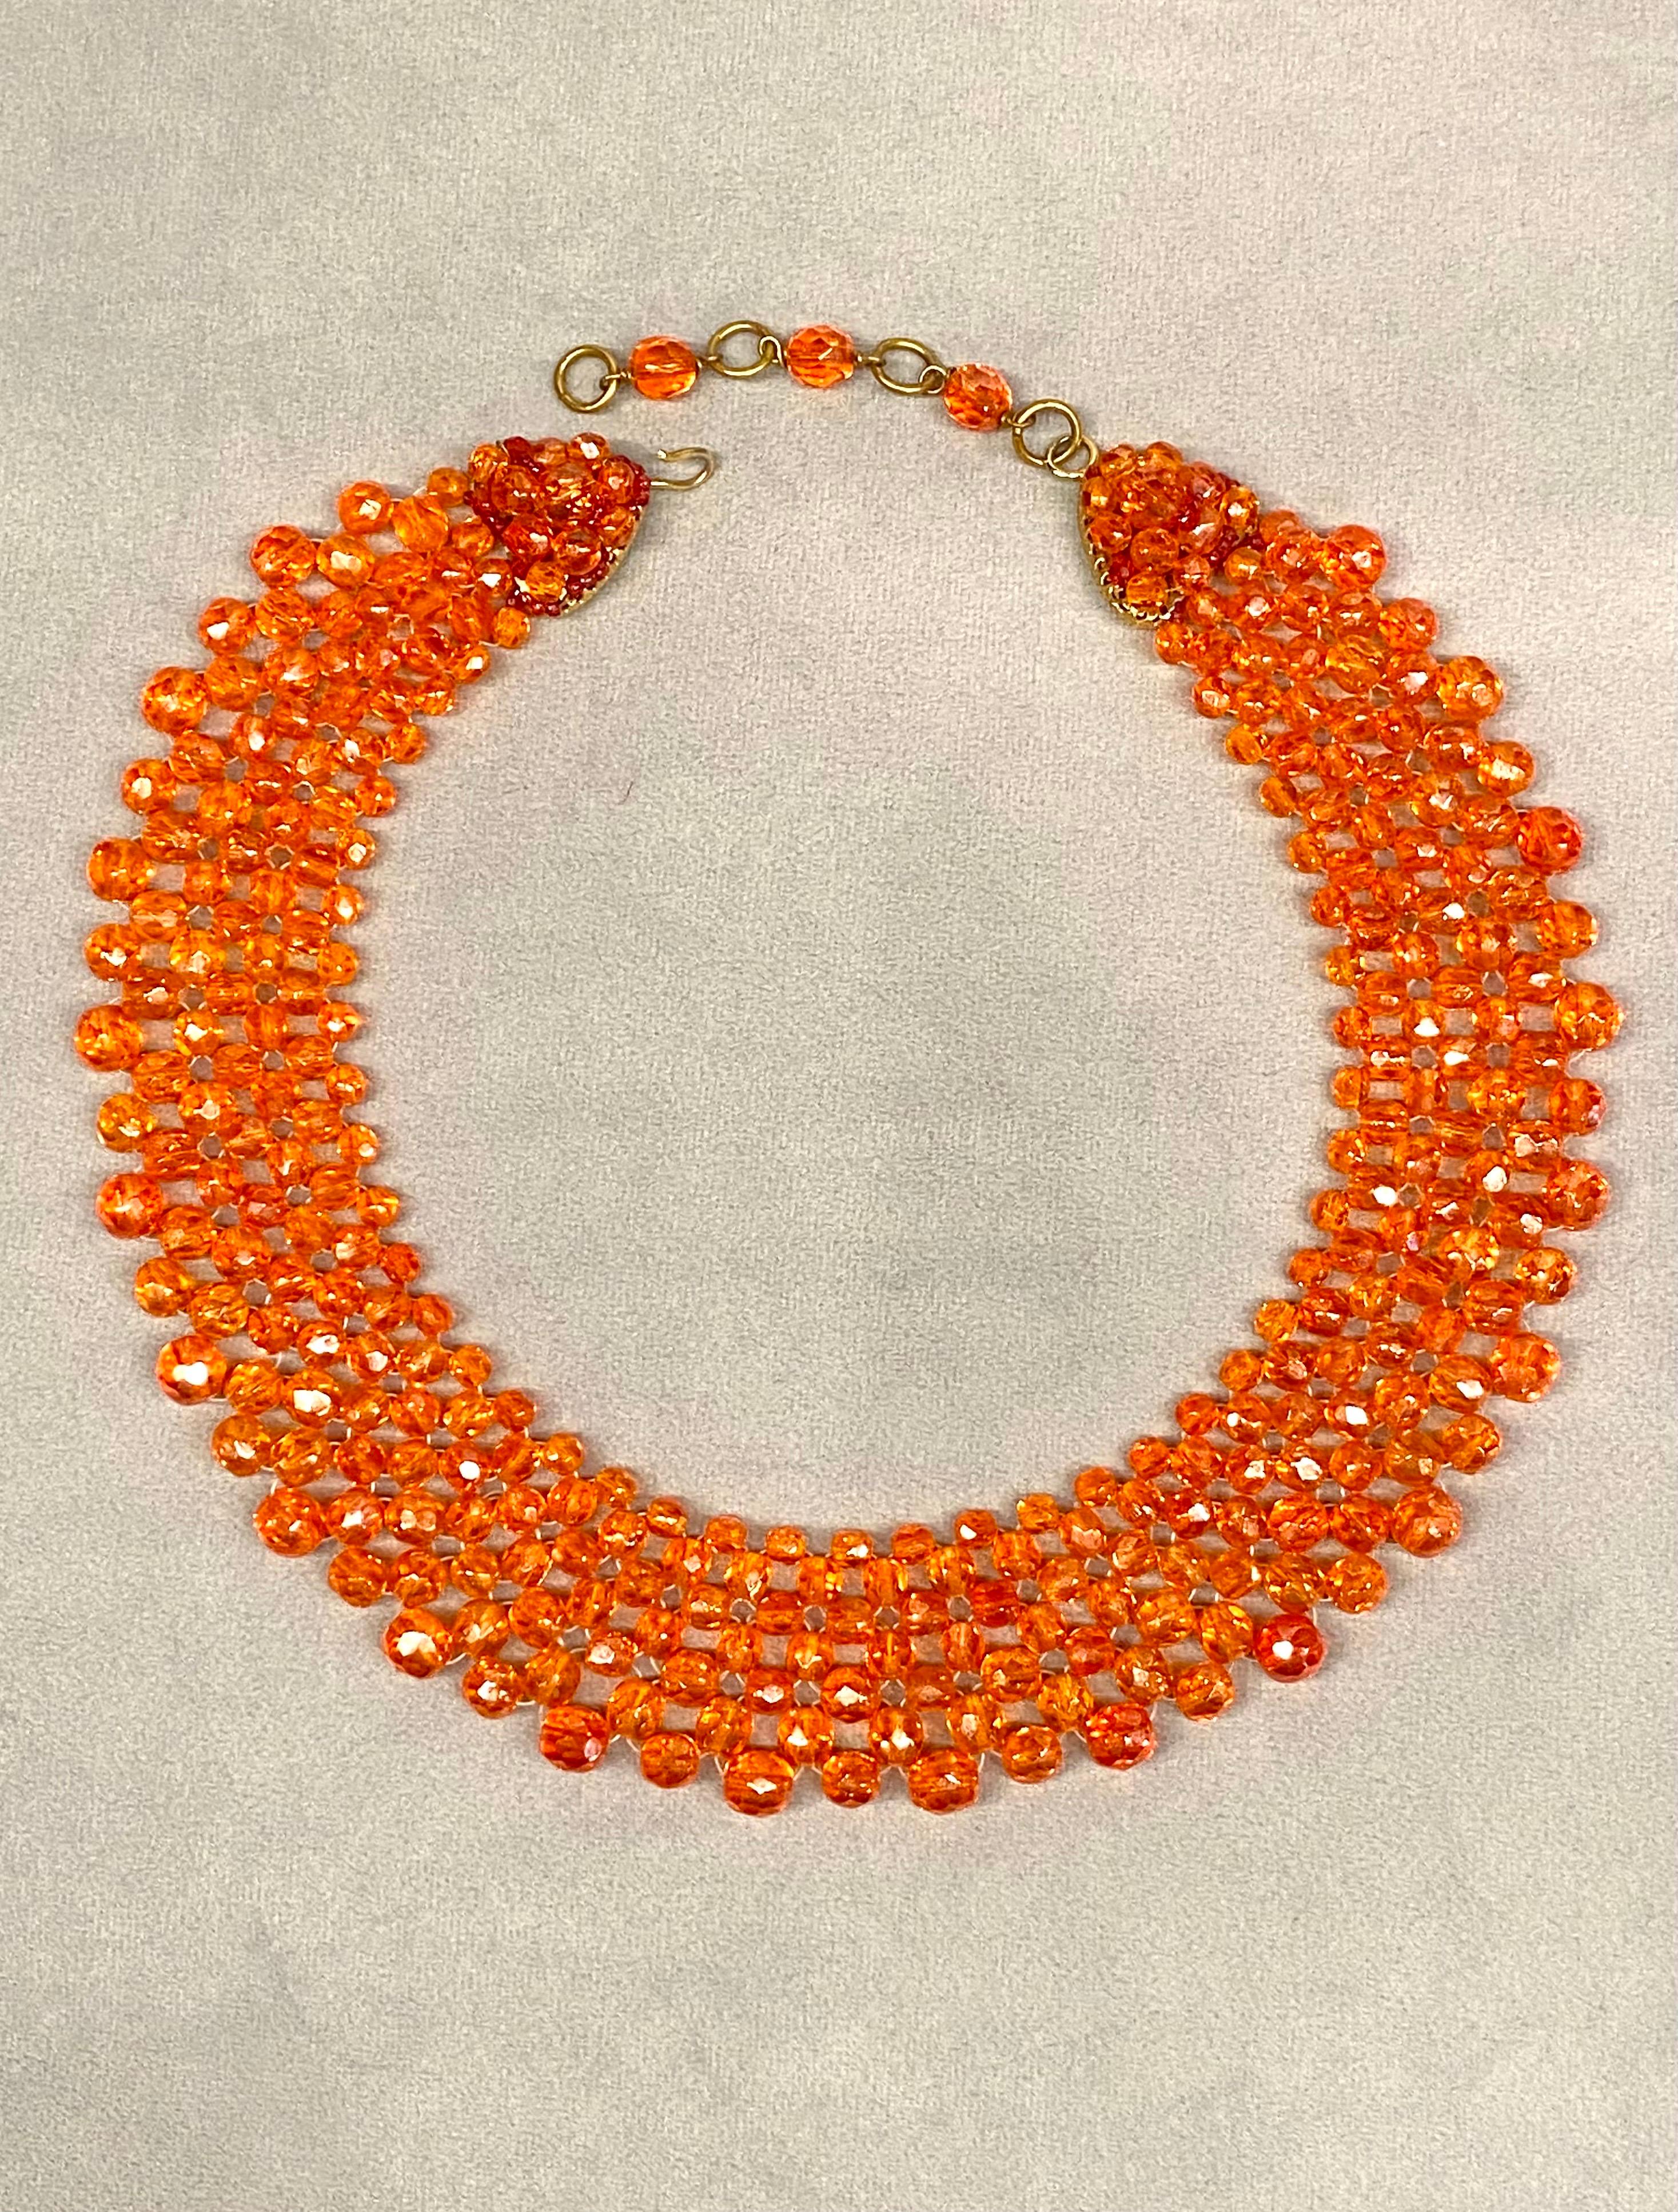 This 1950s Coppola e Toppo orange crystal bead necklace is a striking and collectible piece of jewelry. Known for their intricate beadwork and bold designs, brother and sister team Bruno and Lyda Coppola began creating their famous style of jewelry